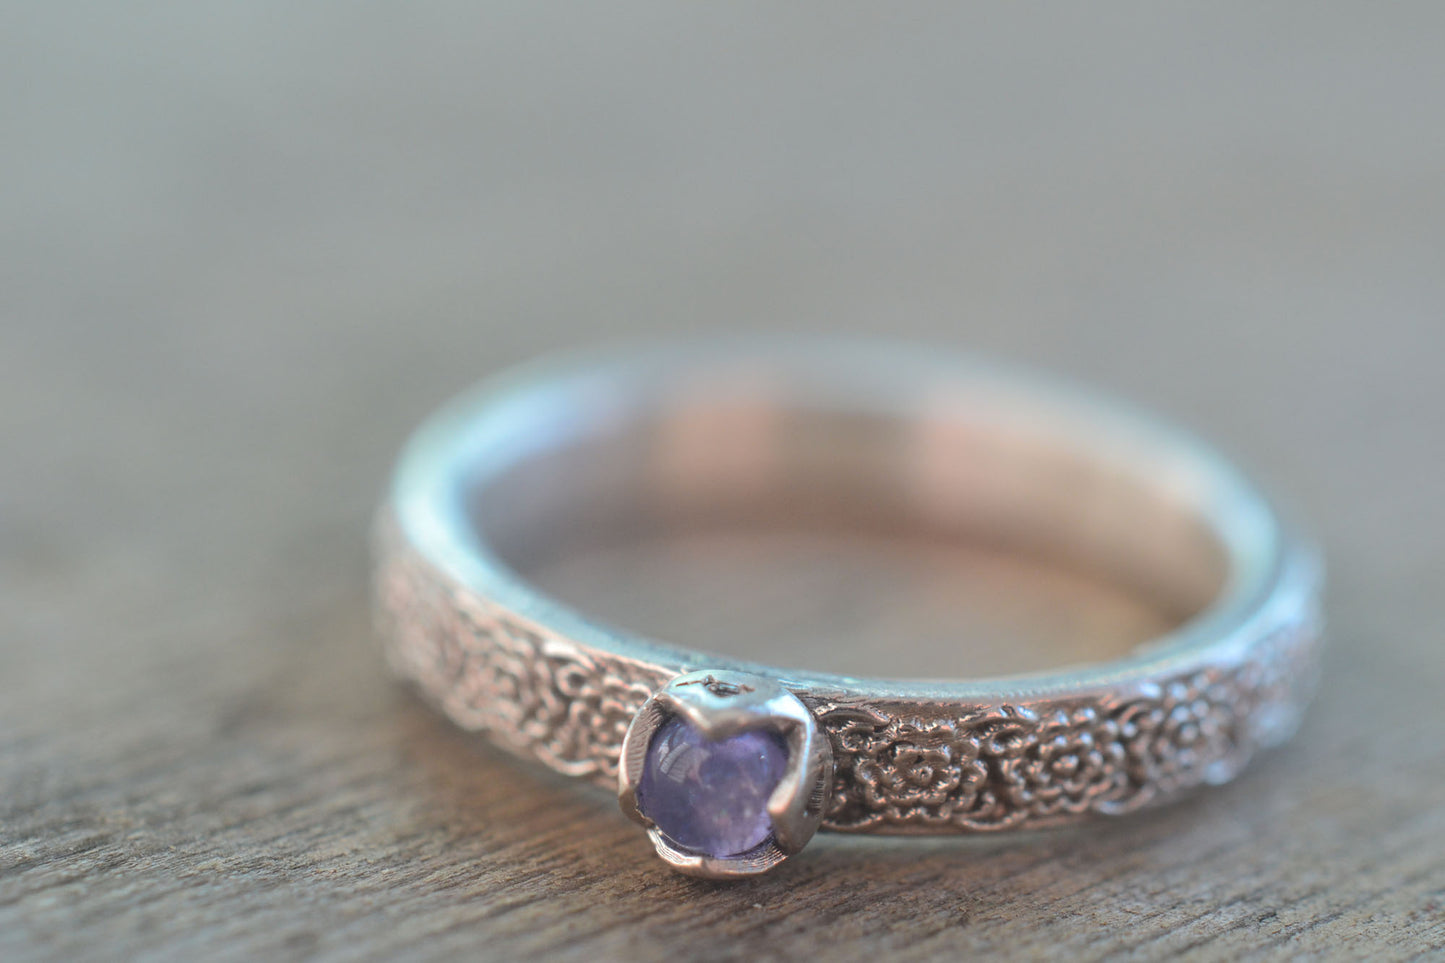 3mm Tanzanite Ring With Flower Pattern